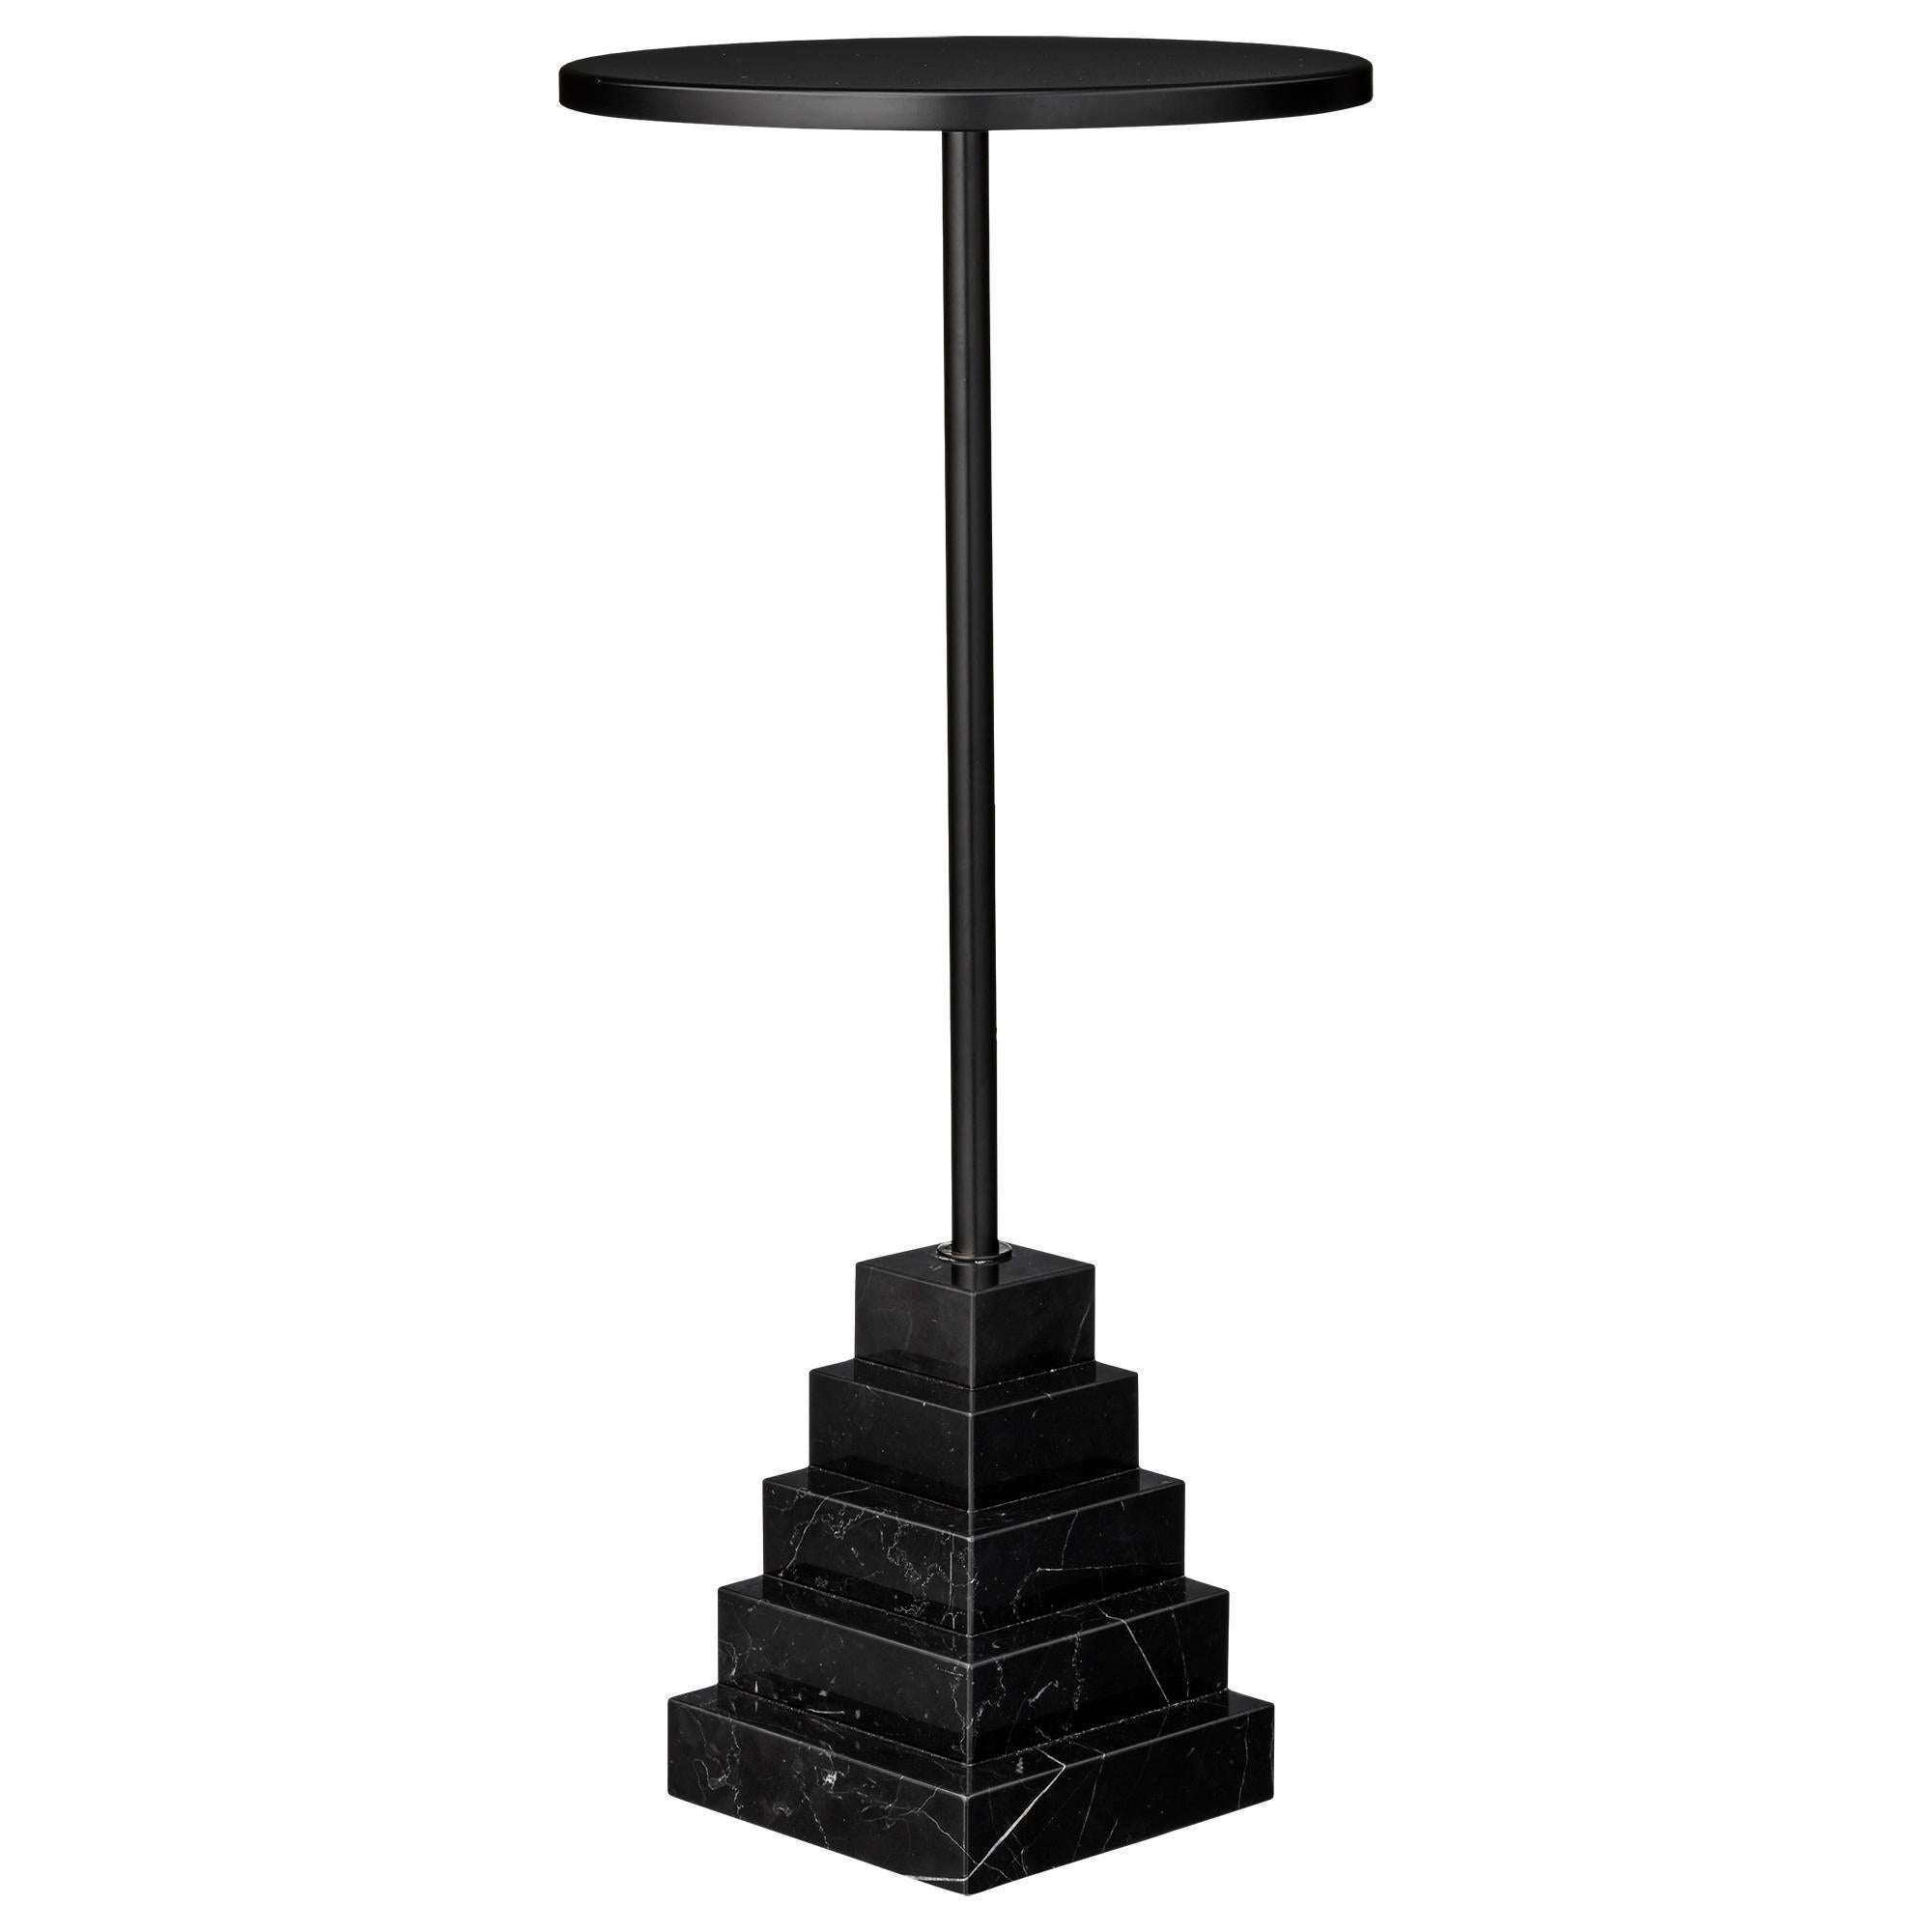 Marble and steel black top side table
Dimensions: Ø32 x H 67 cm
Materials: Steel, marble base

The unique shape will make them stand out in any room in the home and truly appear as pieces of art. The tables are made of a foot in marble or